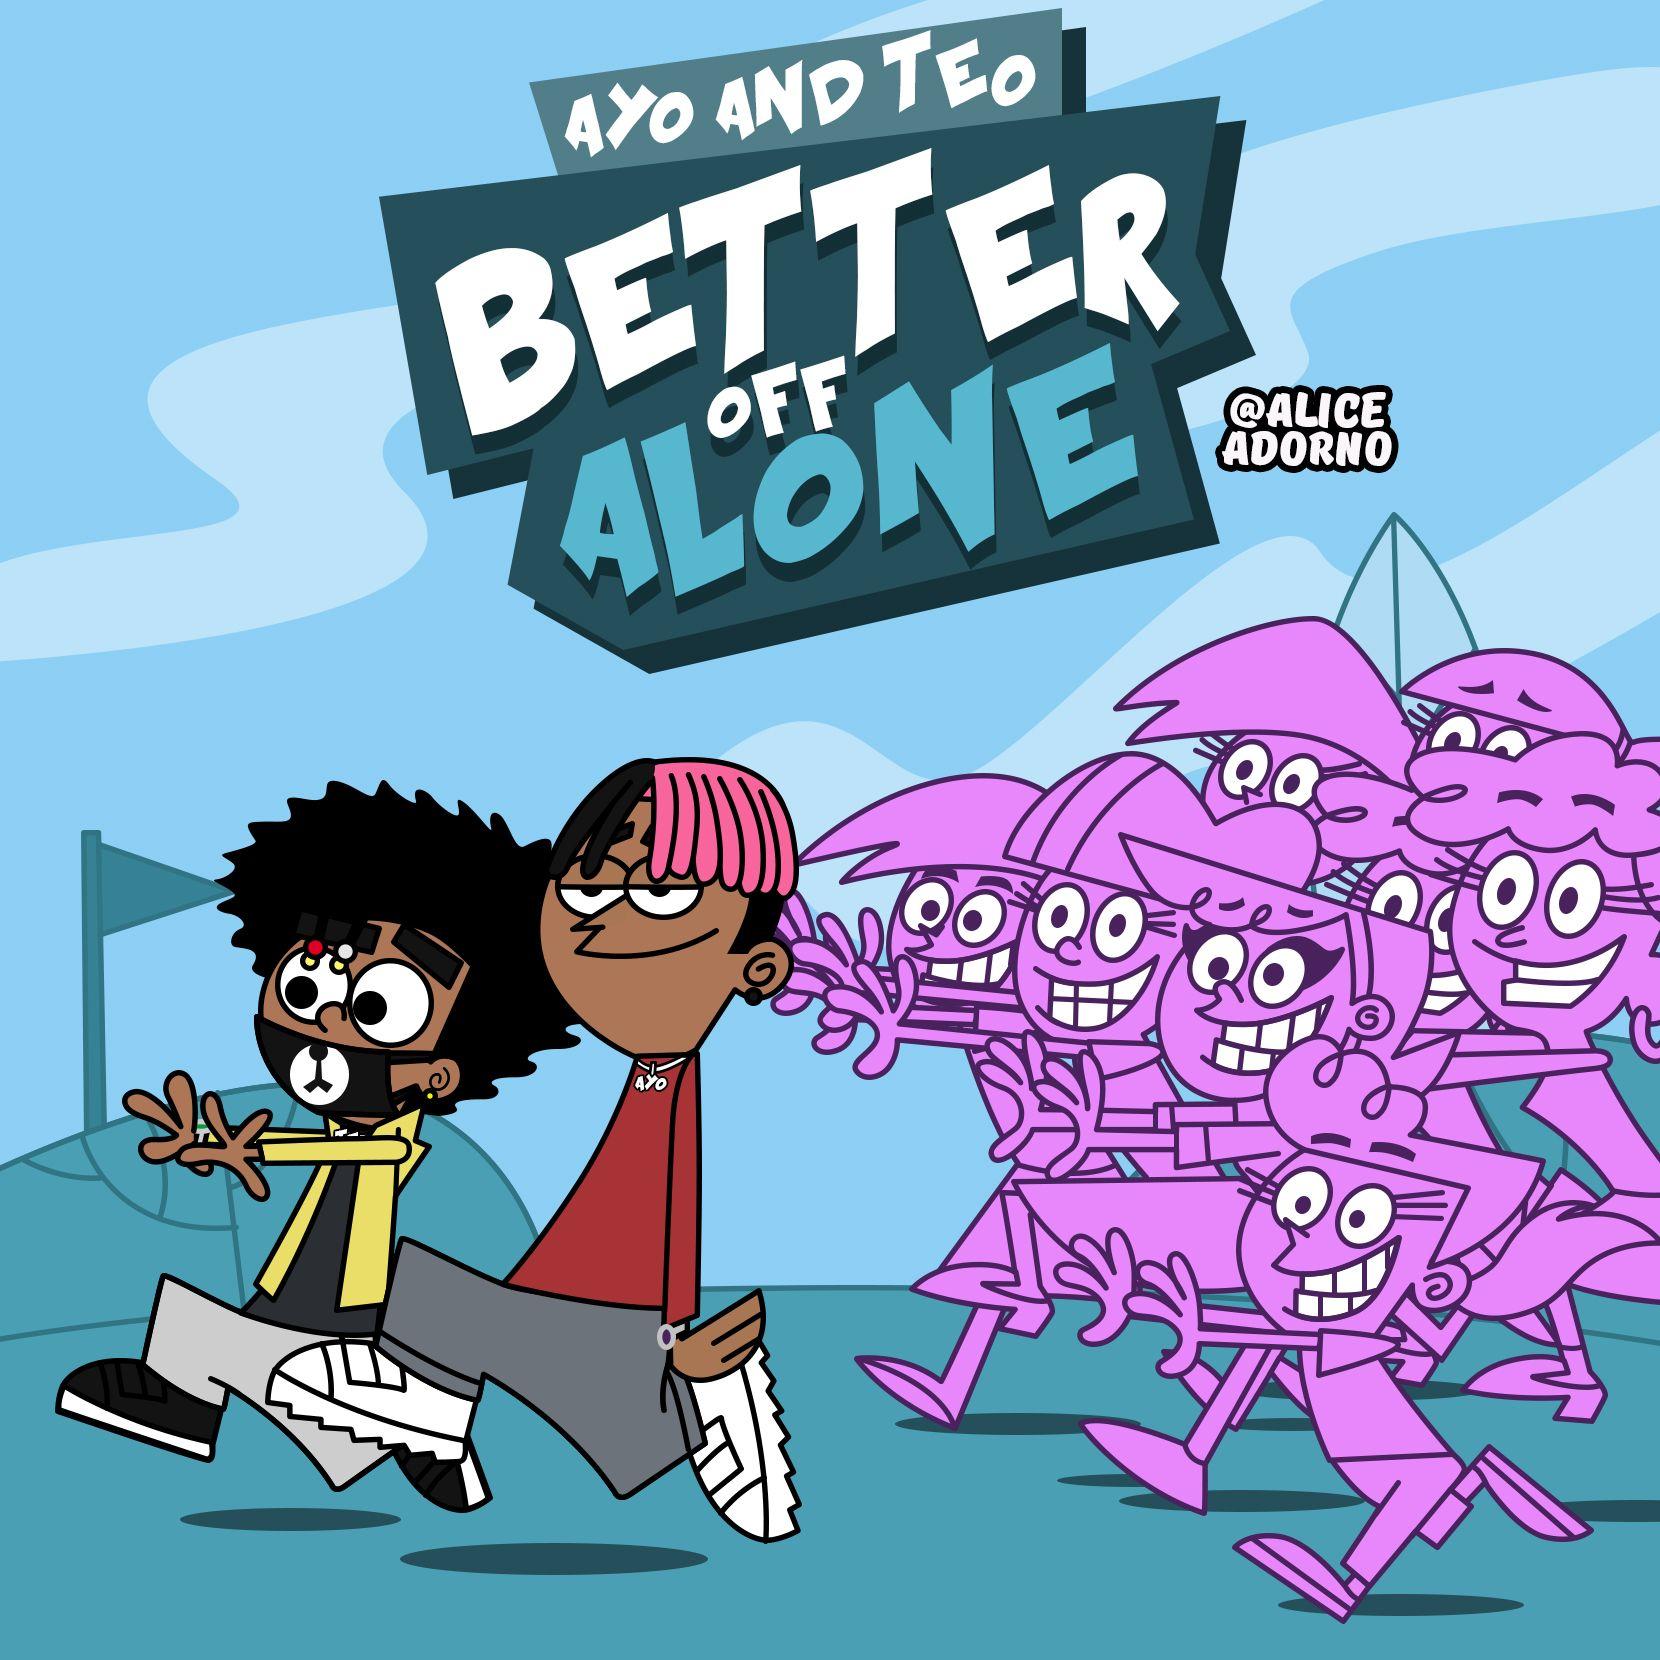 Ayo And Teo Wallpapers Wallpaper Cave - roblox better off alone ayo and teo